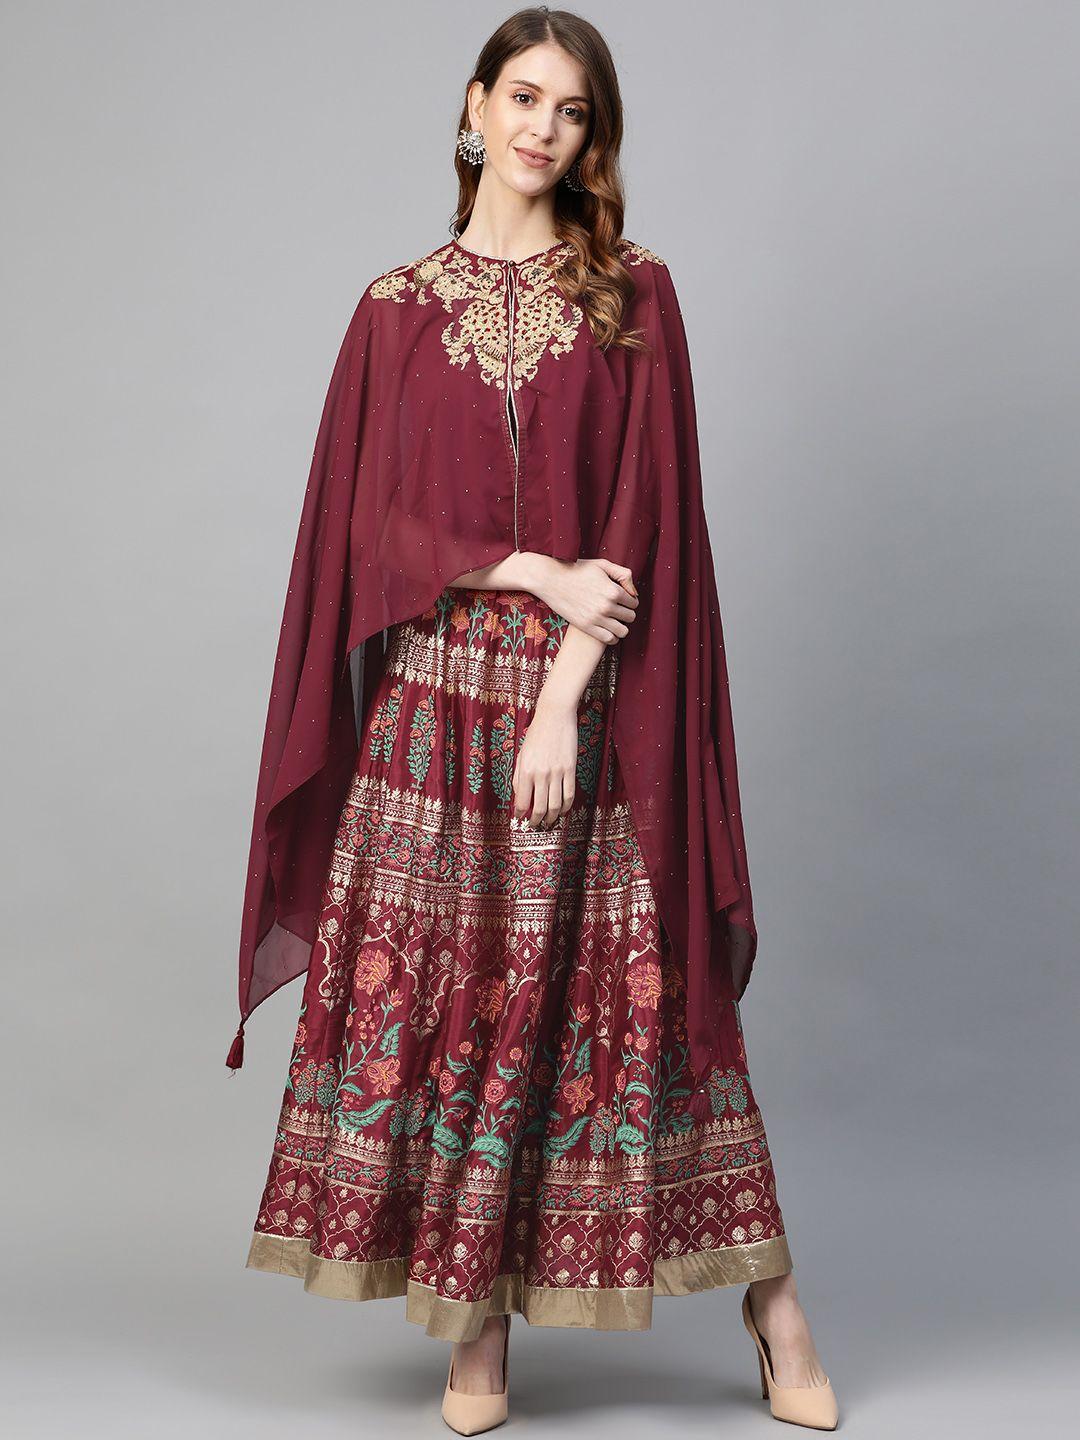 wishful by w women maroon & golden embroidered top with skirt